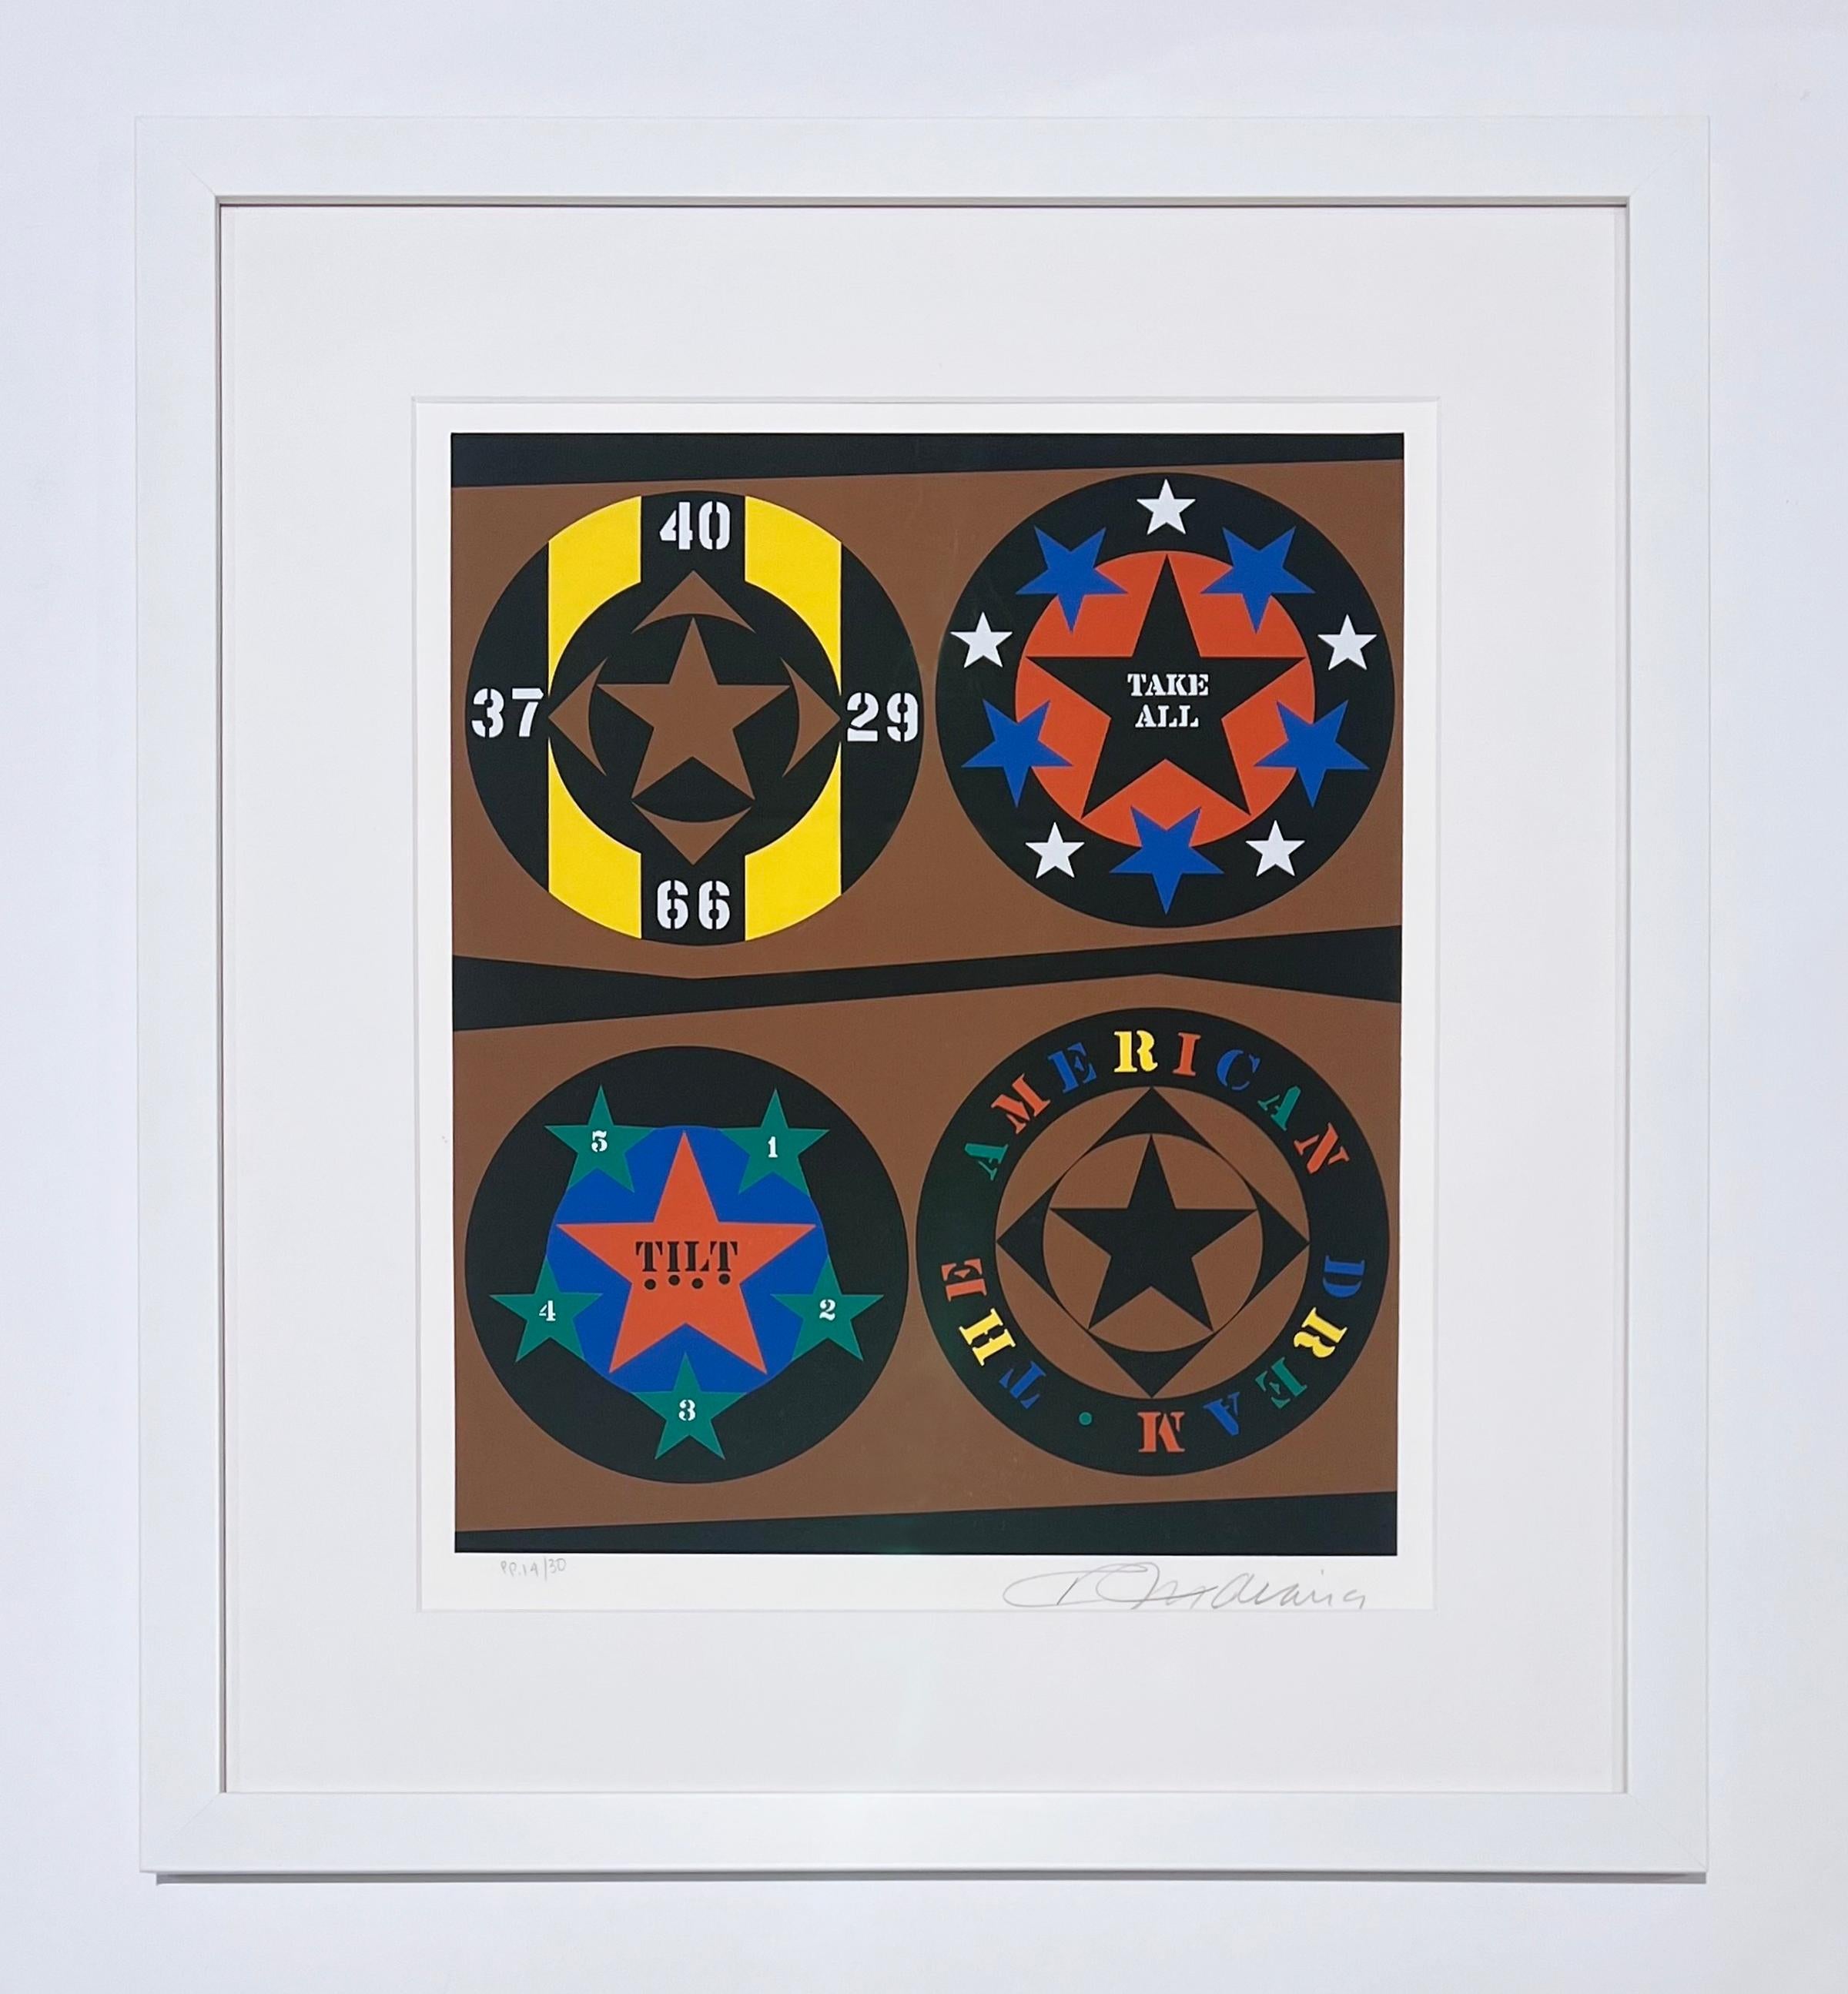 The American Dream - Print by Robert Indiana